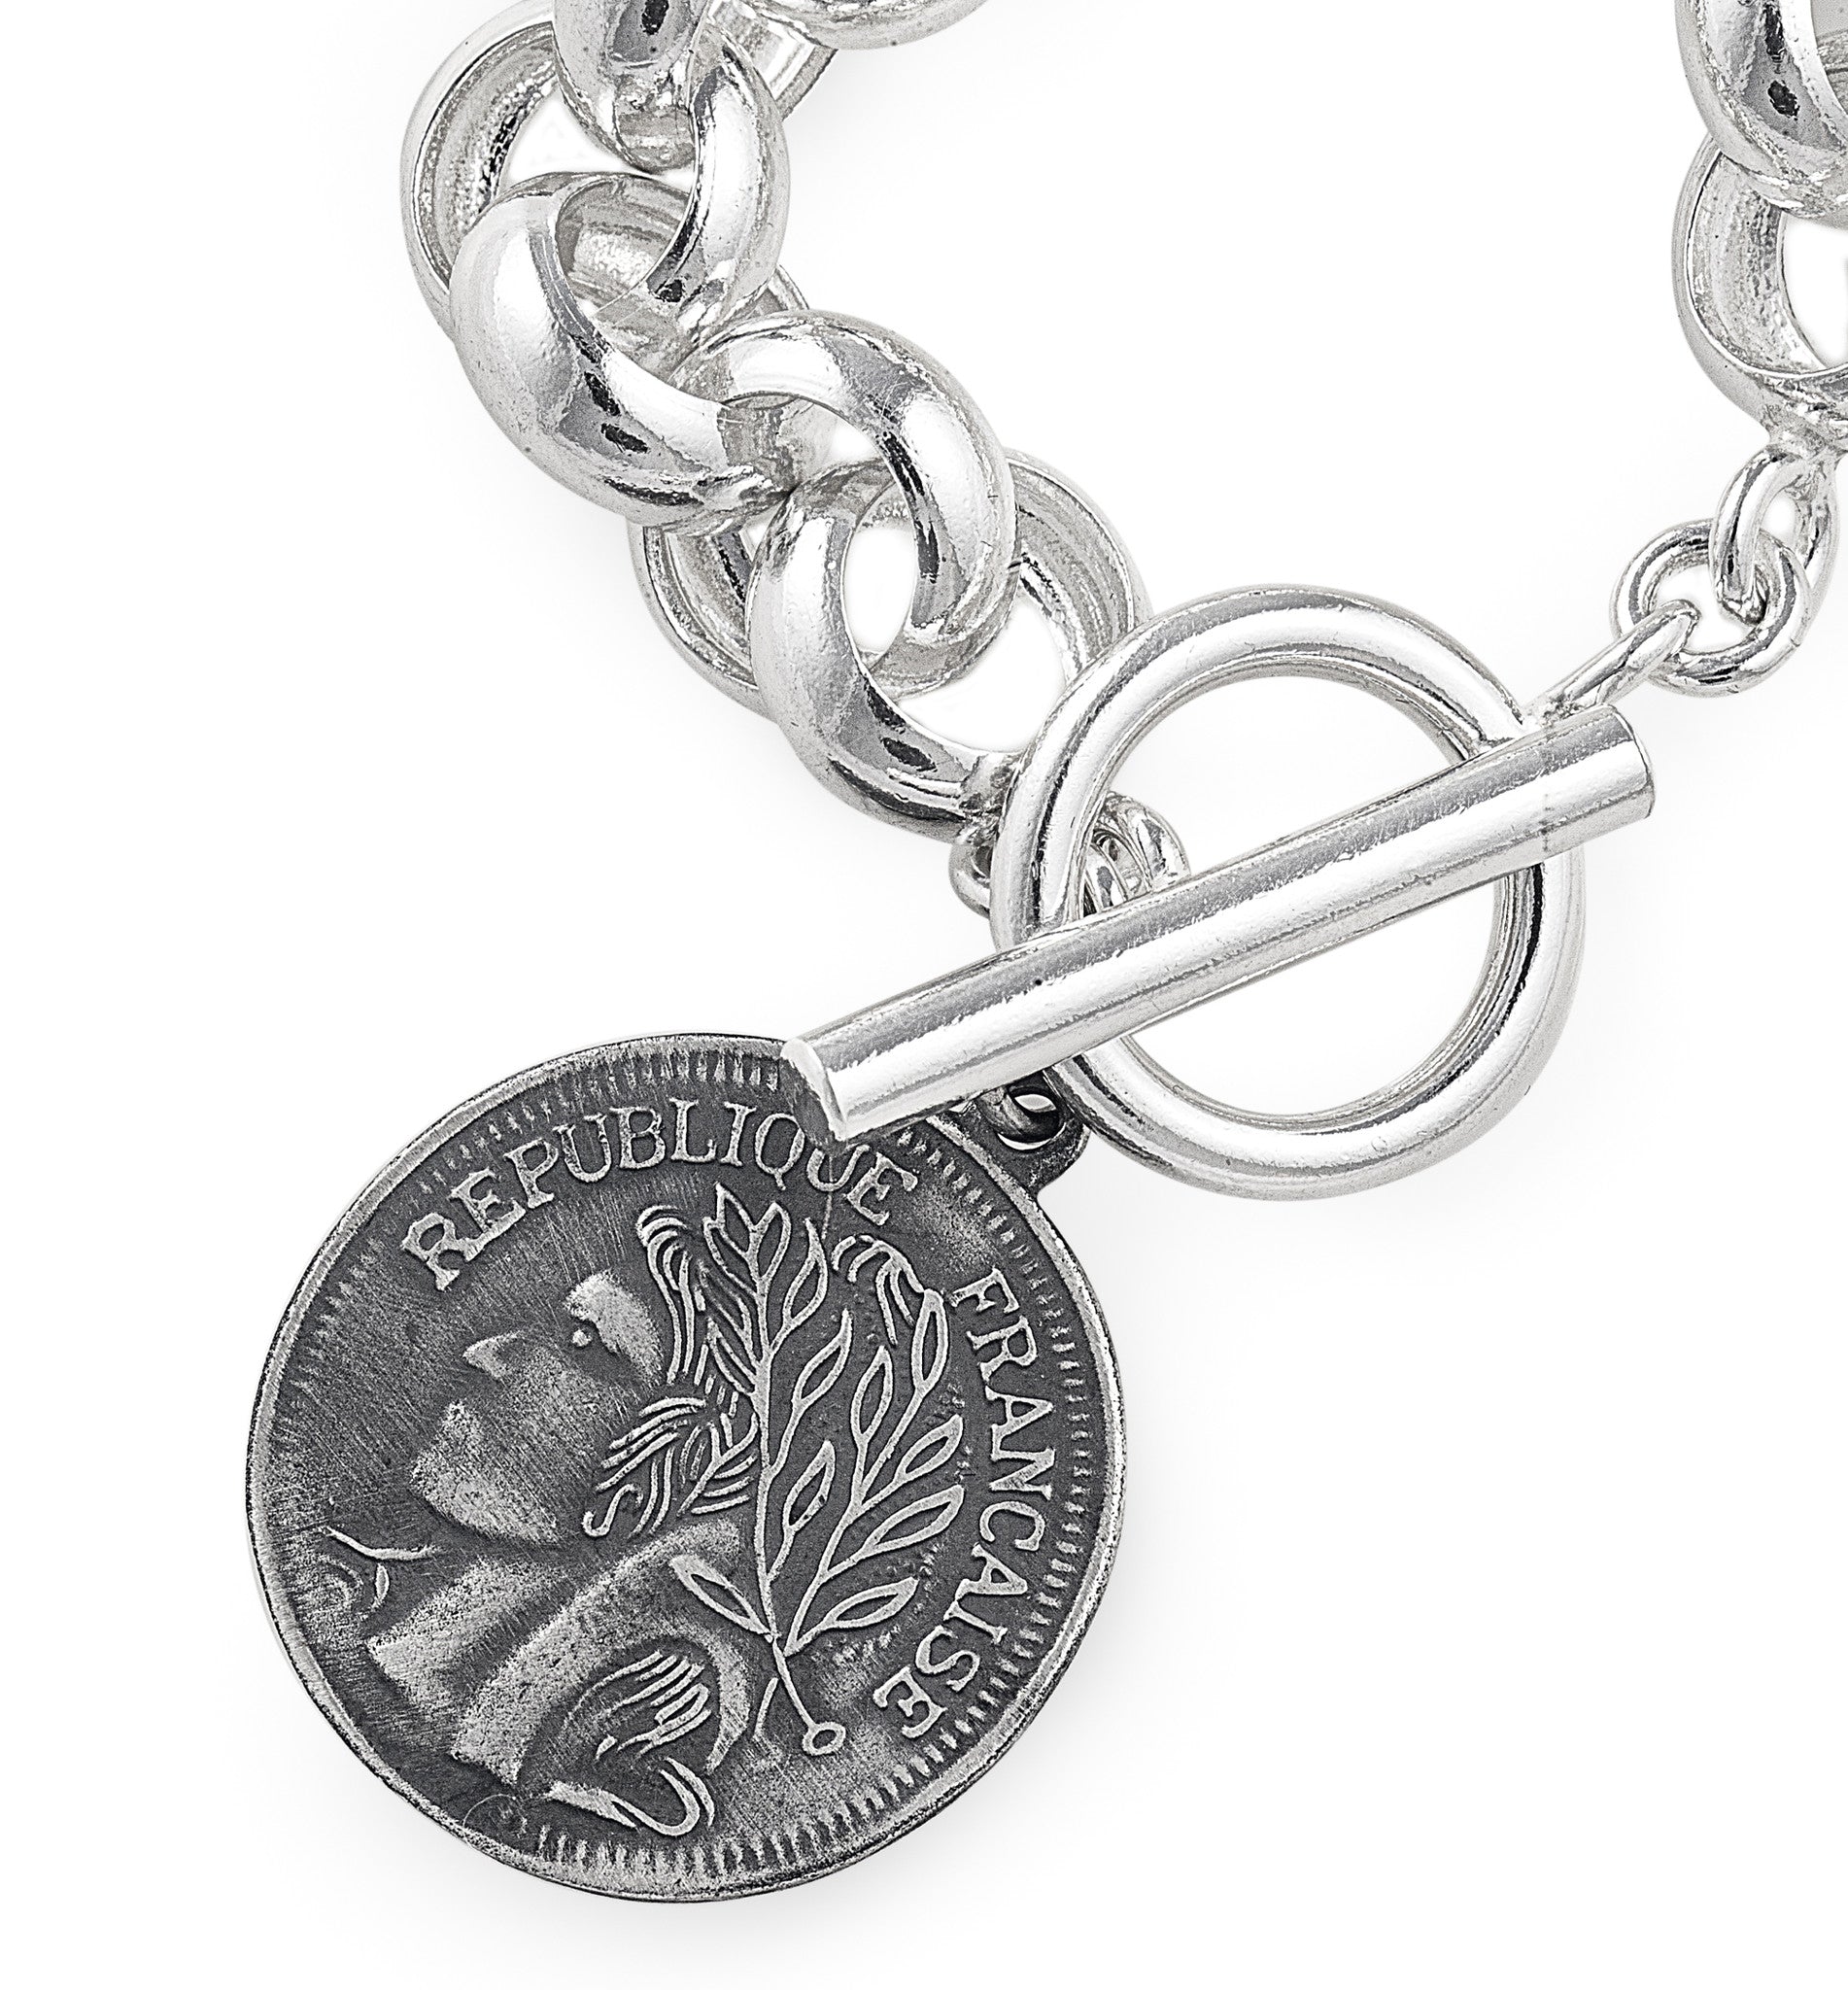 belcher style Romana Bracelet in 925 sterling silver with toggle closure and large coin charm. Worldwide shipping.